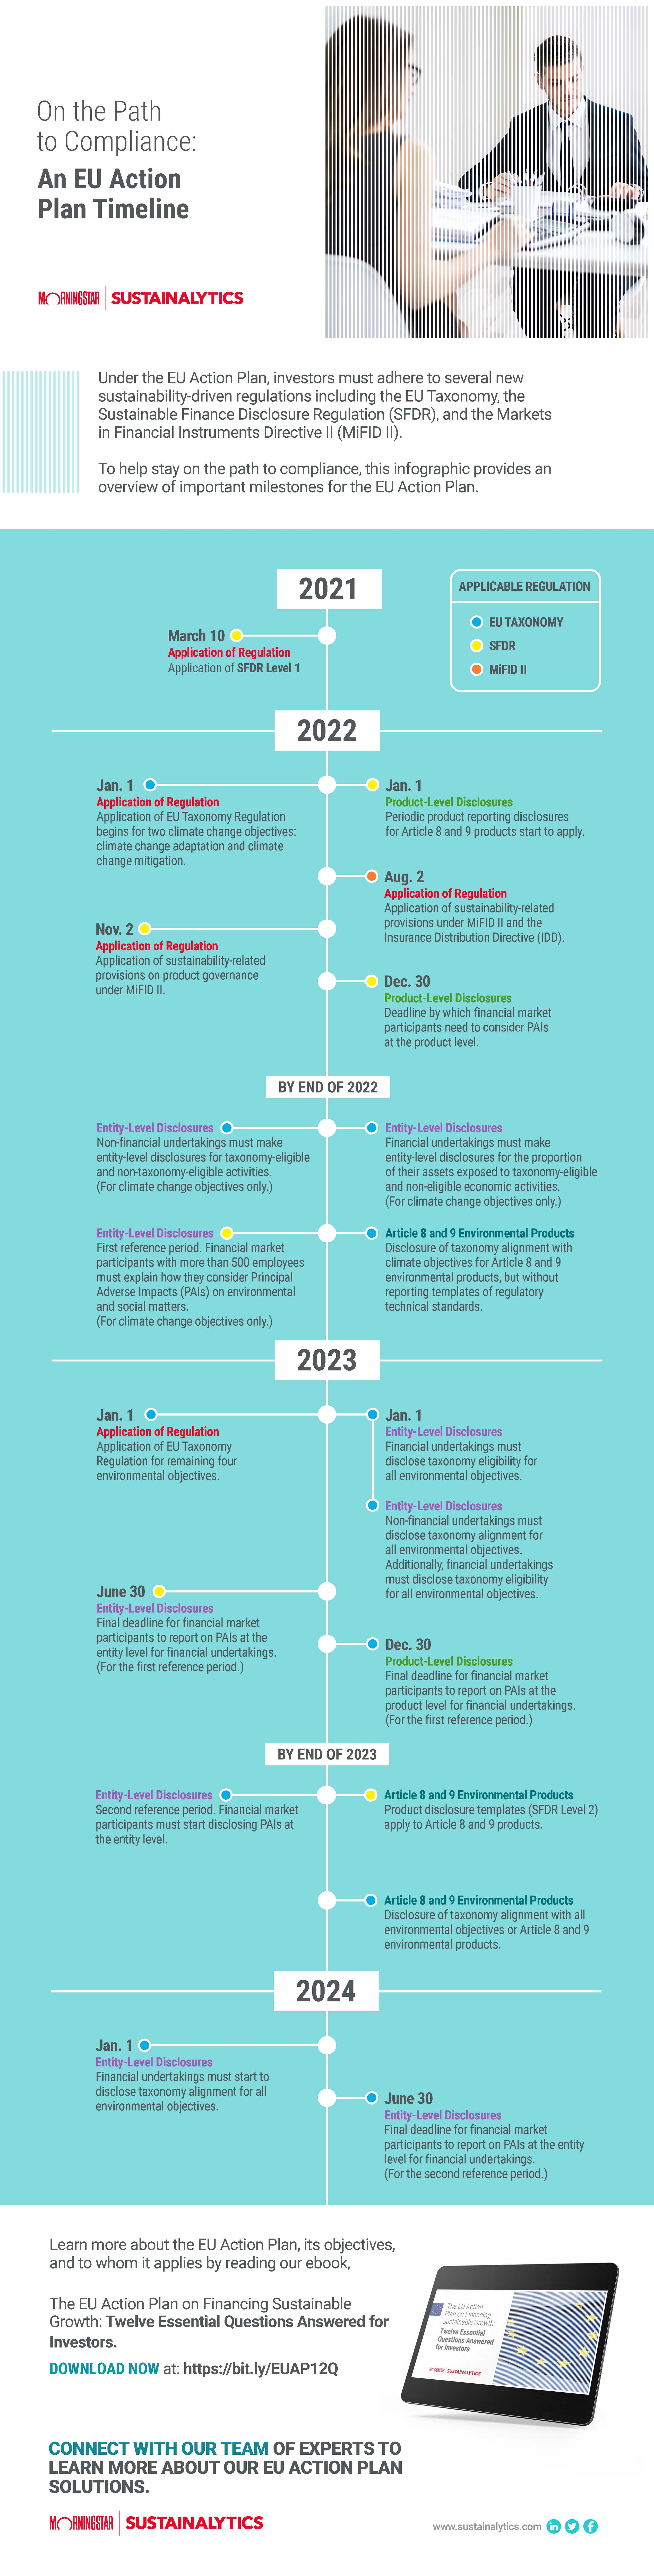 An infographic featuring a timeline of important compliance dates for the EU Action Plan on Financing Sustainable Growth